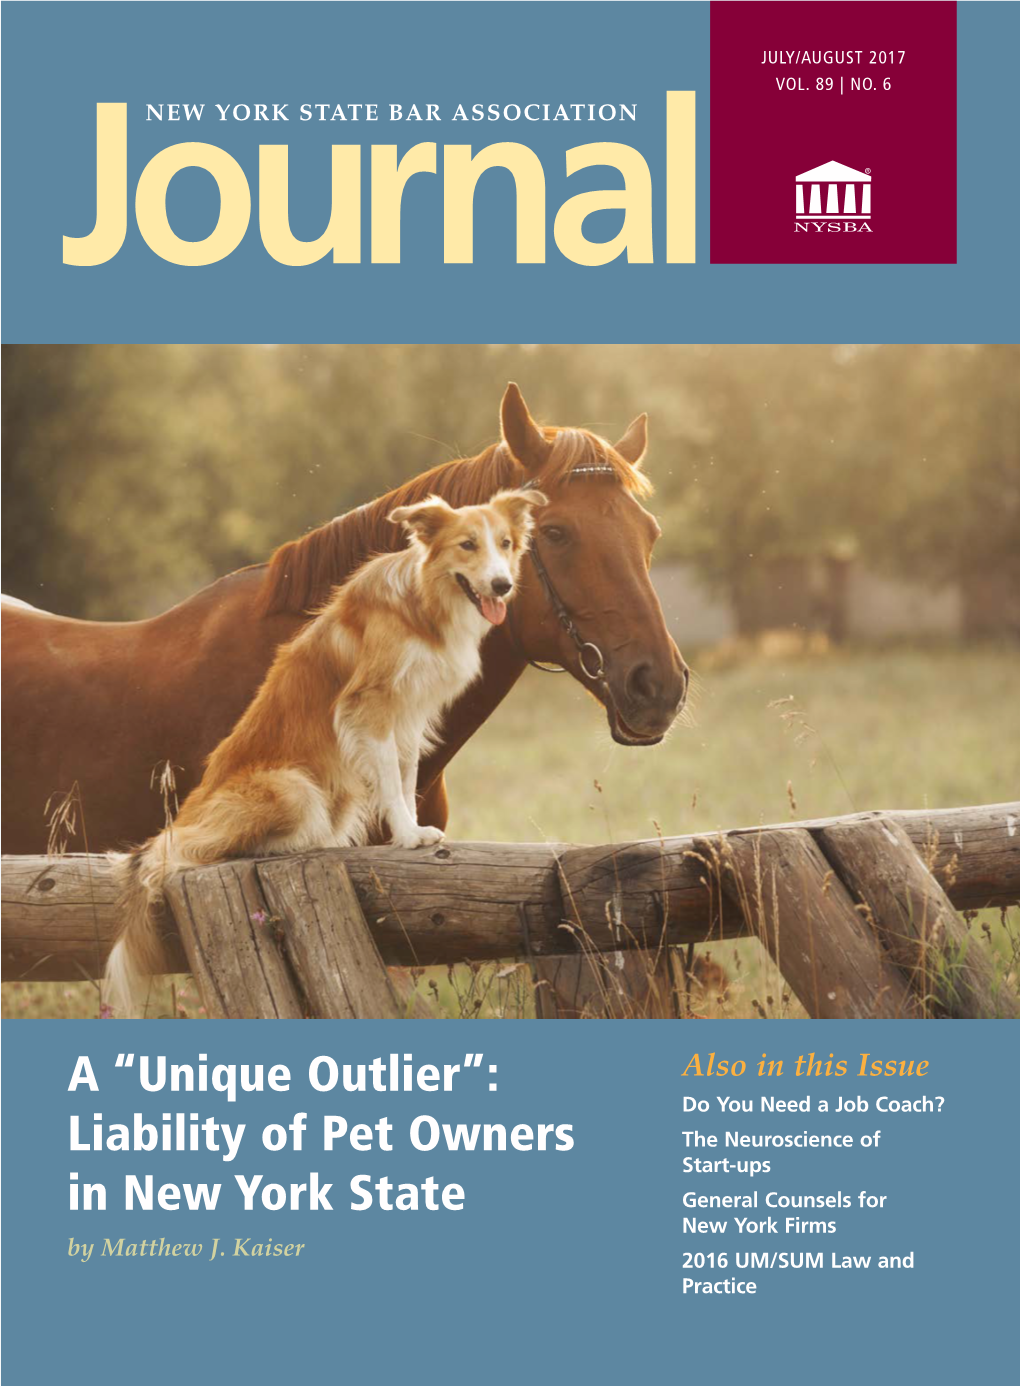 A “UNIQUE OUTLIER”: LIABILITY of PET OWNERS in NEW YORK STATE by Matthew J